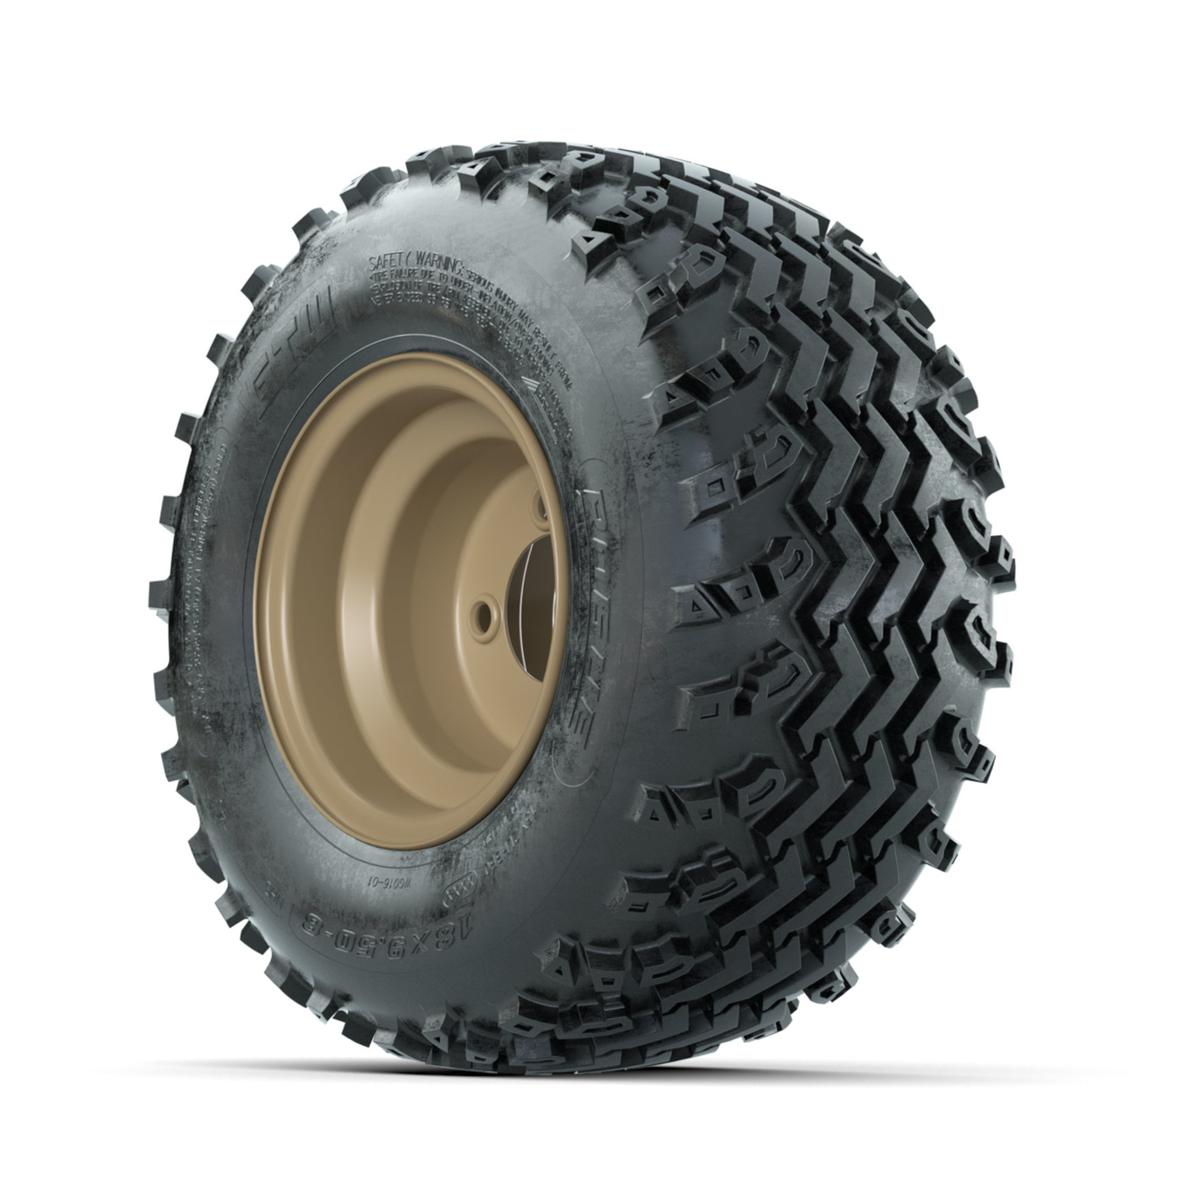 GTW Steel Stone Grey Centered 8 in Wheels with 18x9.50-8 Rogue All Terrain Tires – Full Set